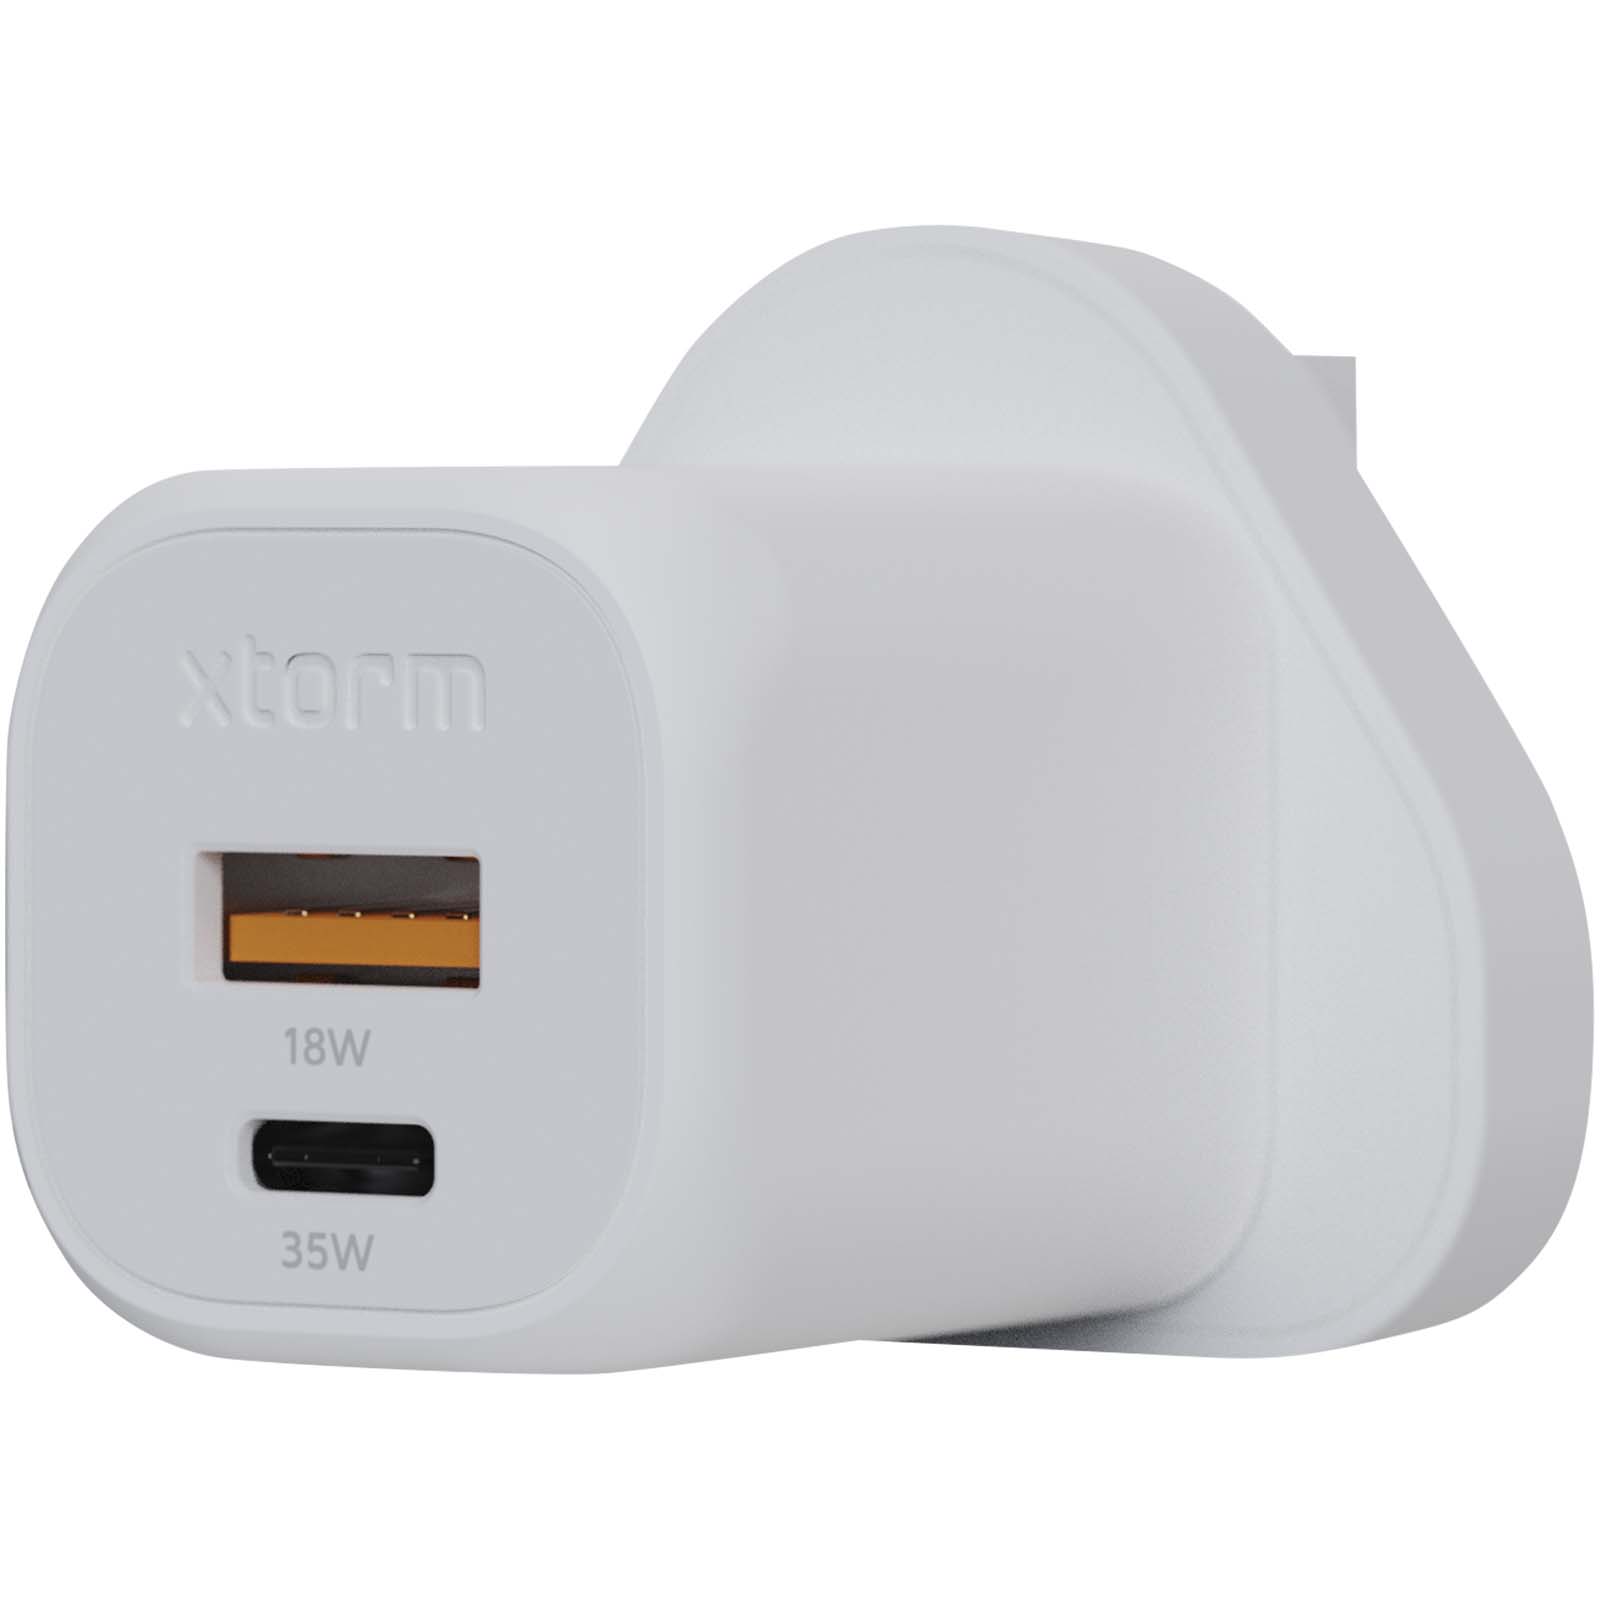 Advertising Chargers - Xtorm XEC035 GaN² Ultra 35W wall charger - UK plug - 3